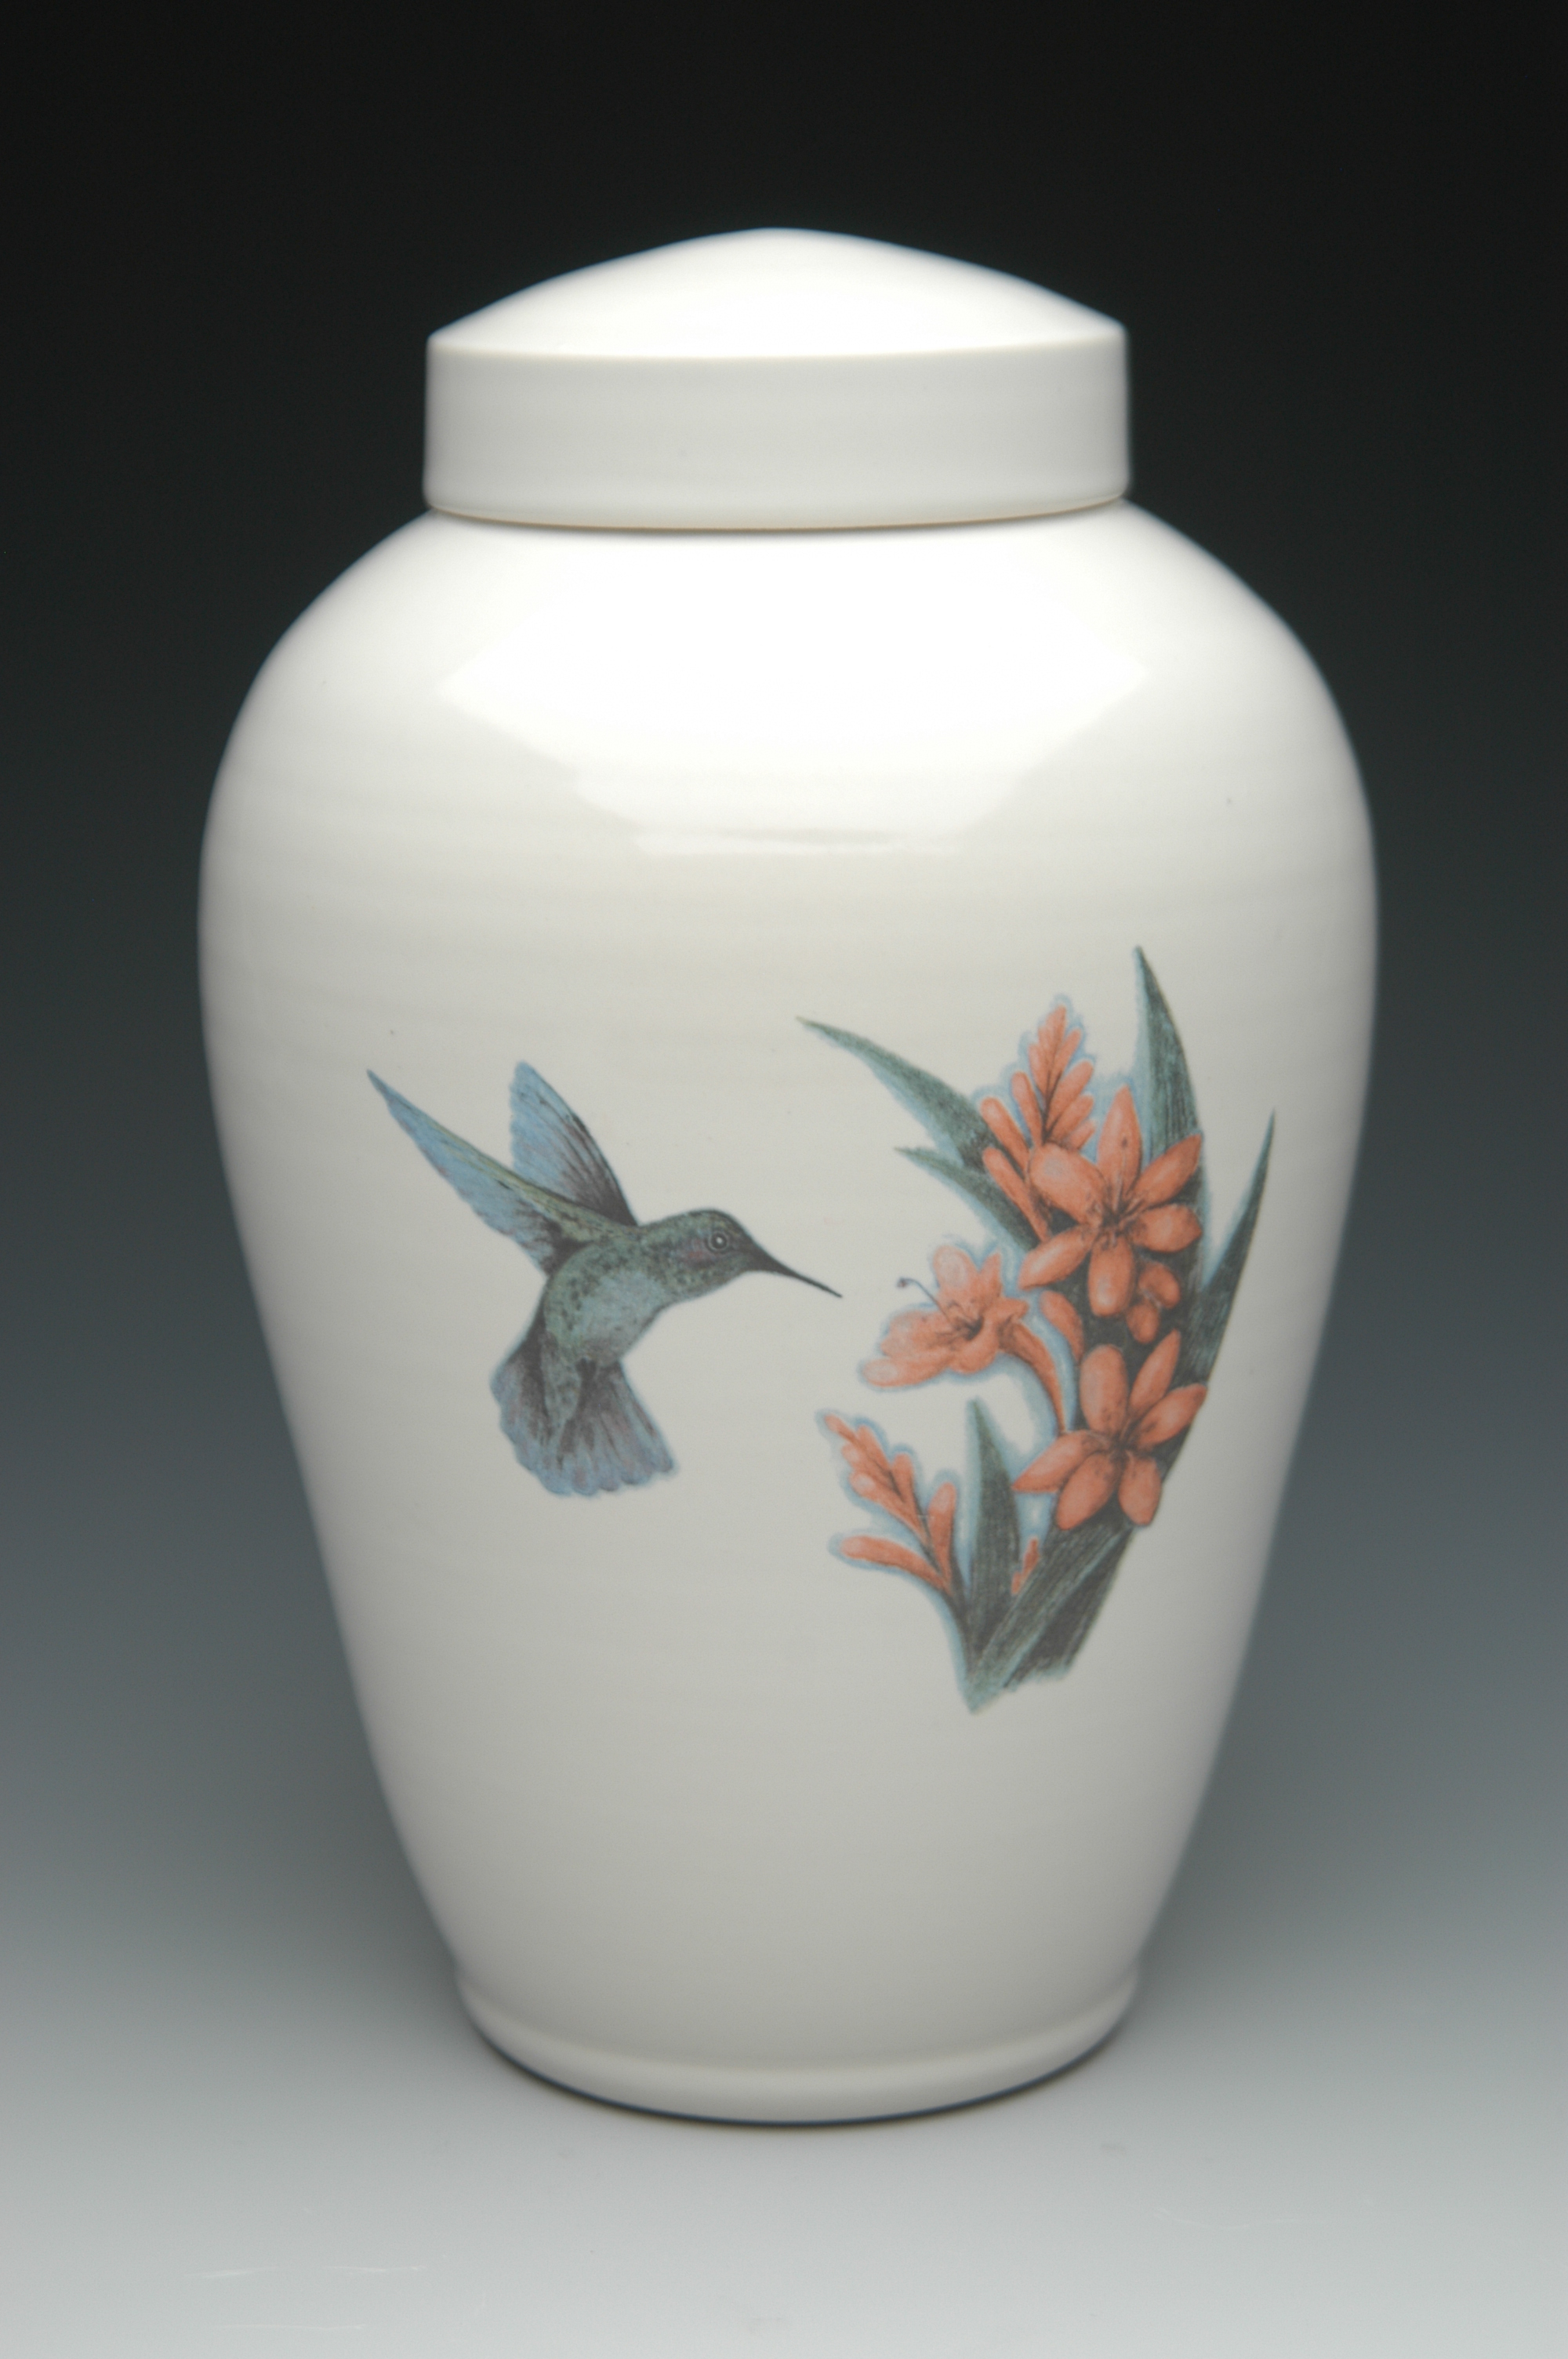 white ceramic urn with hand painted flowers and humming bird